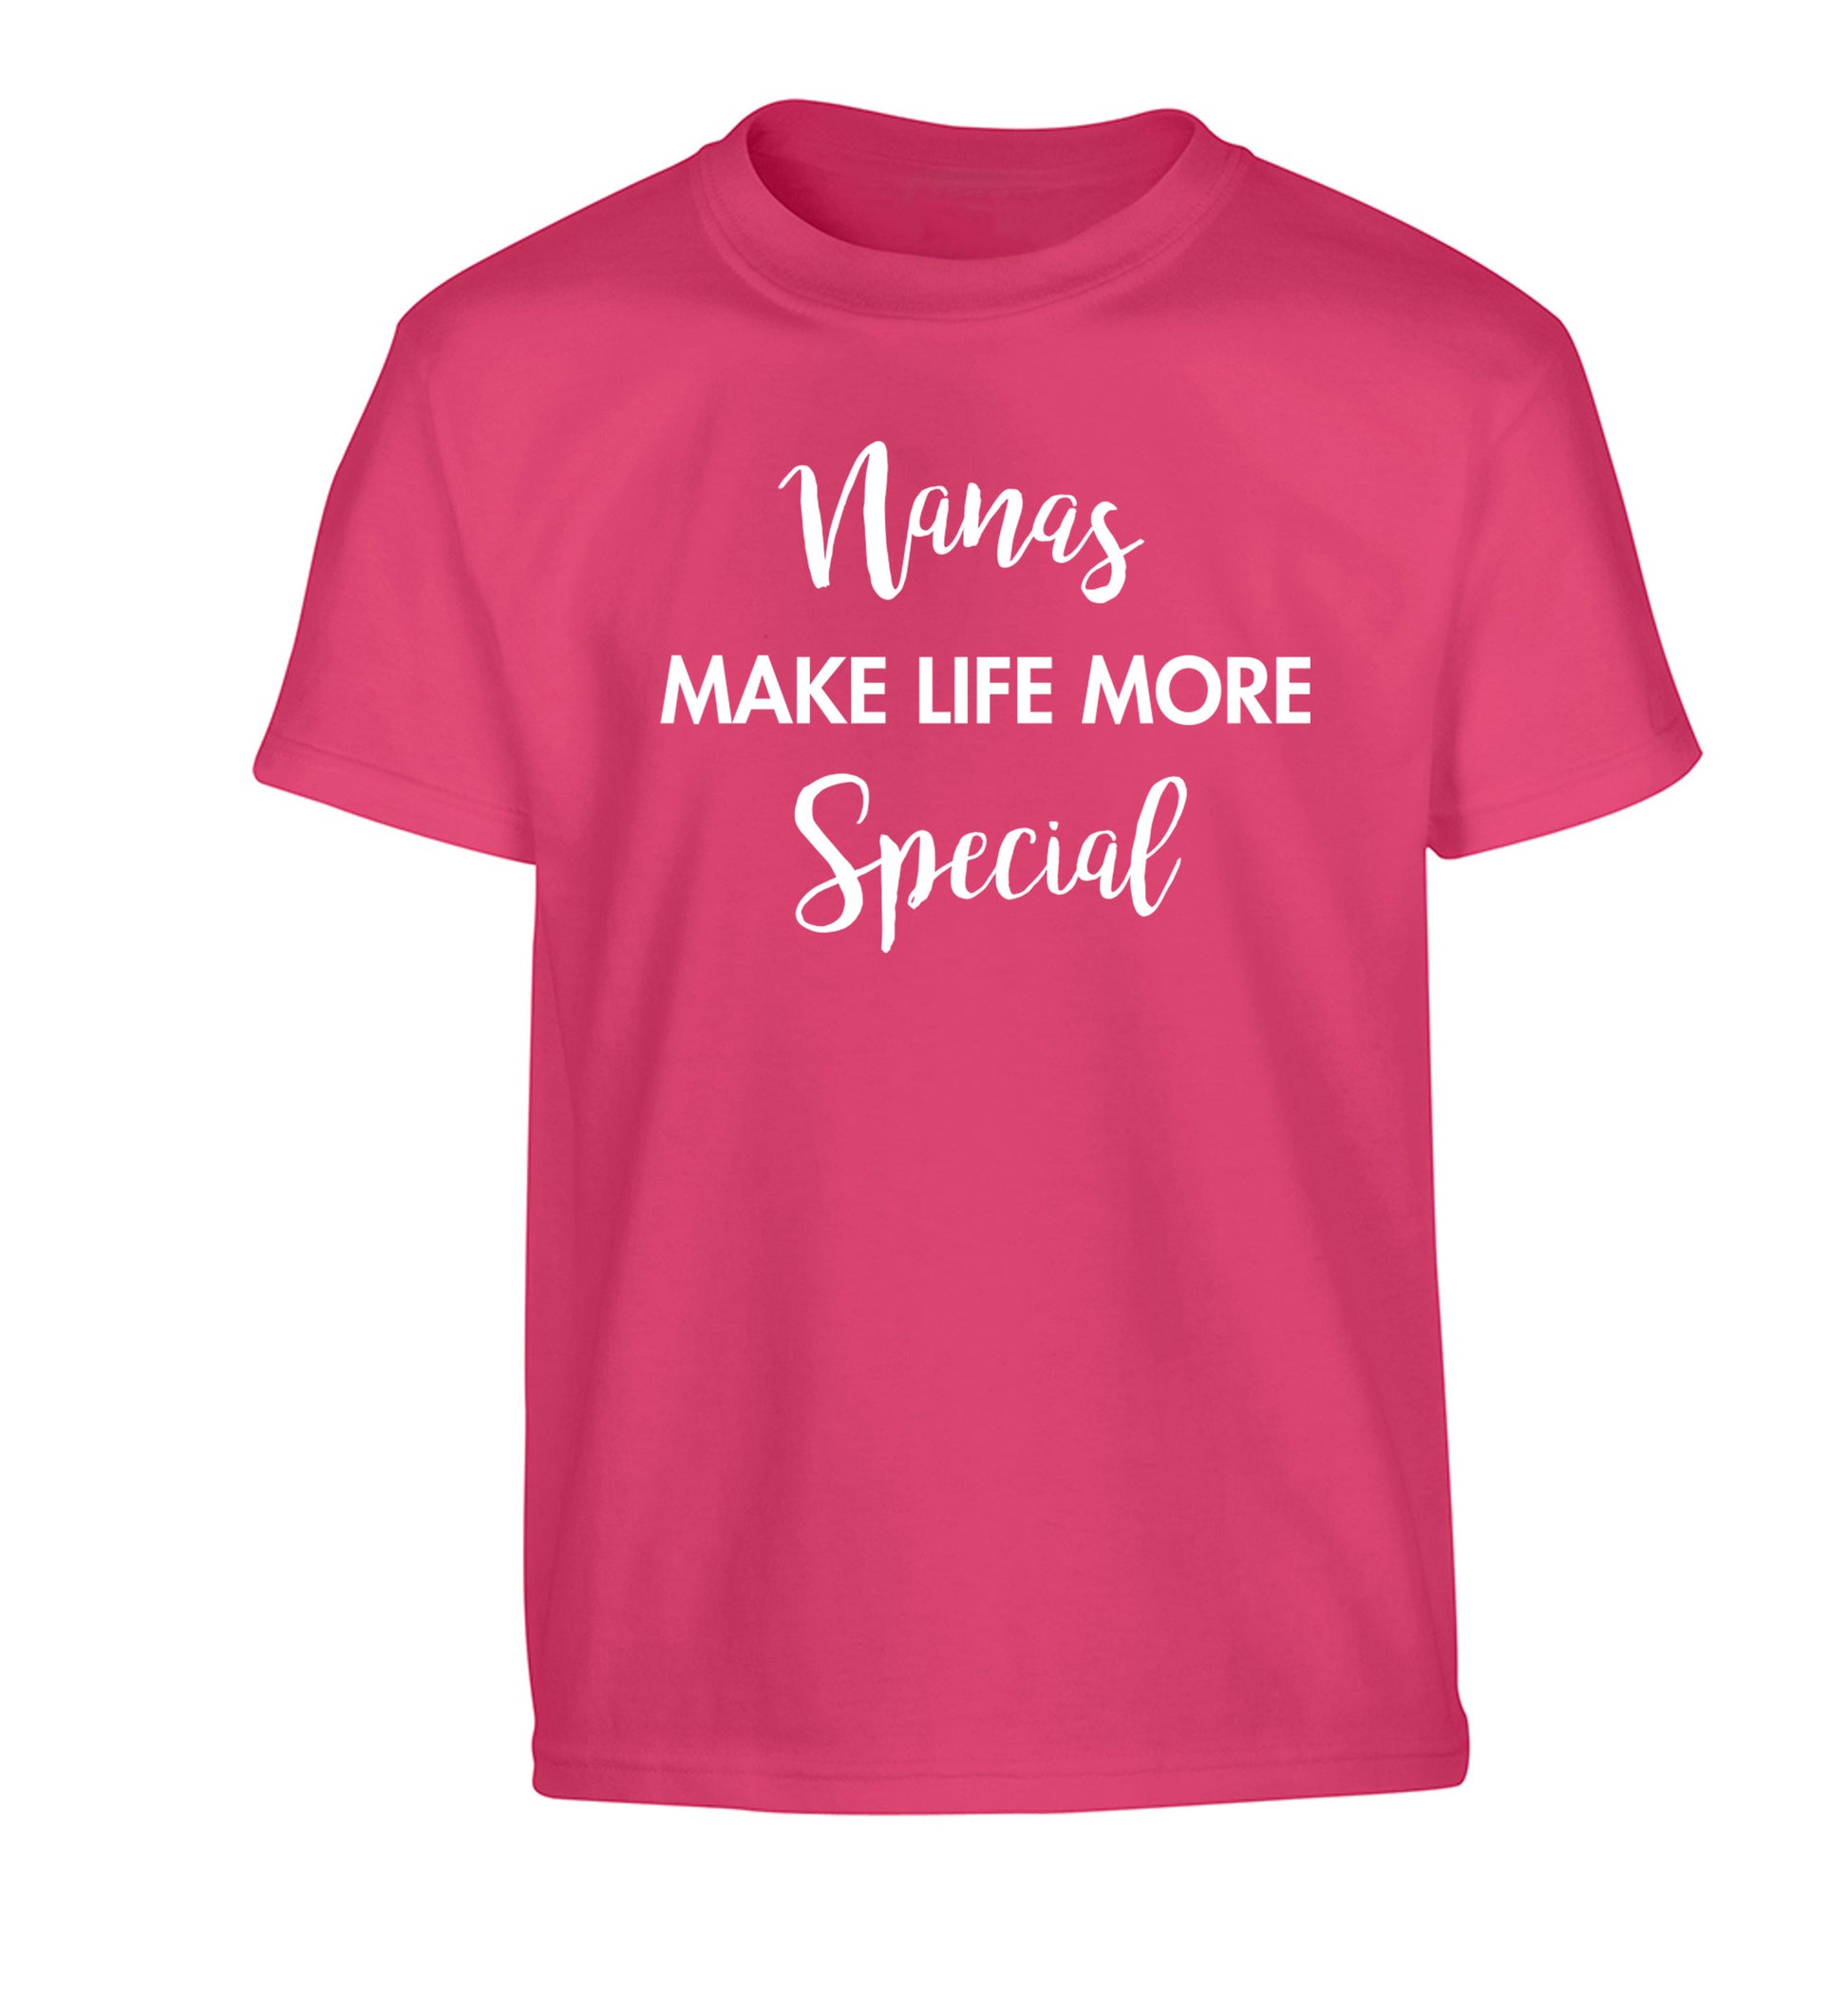 Nanas make life more special Children's pink Tshirt 12-14 Years